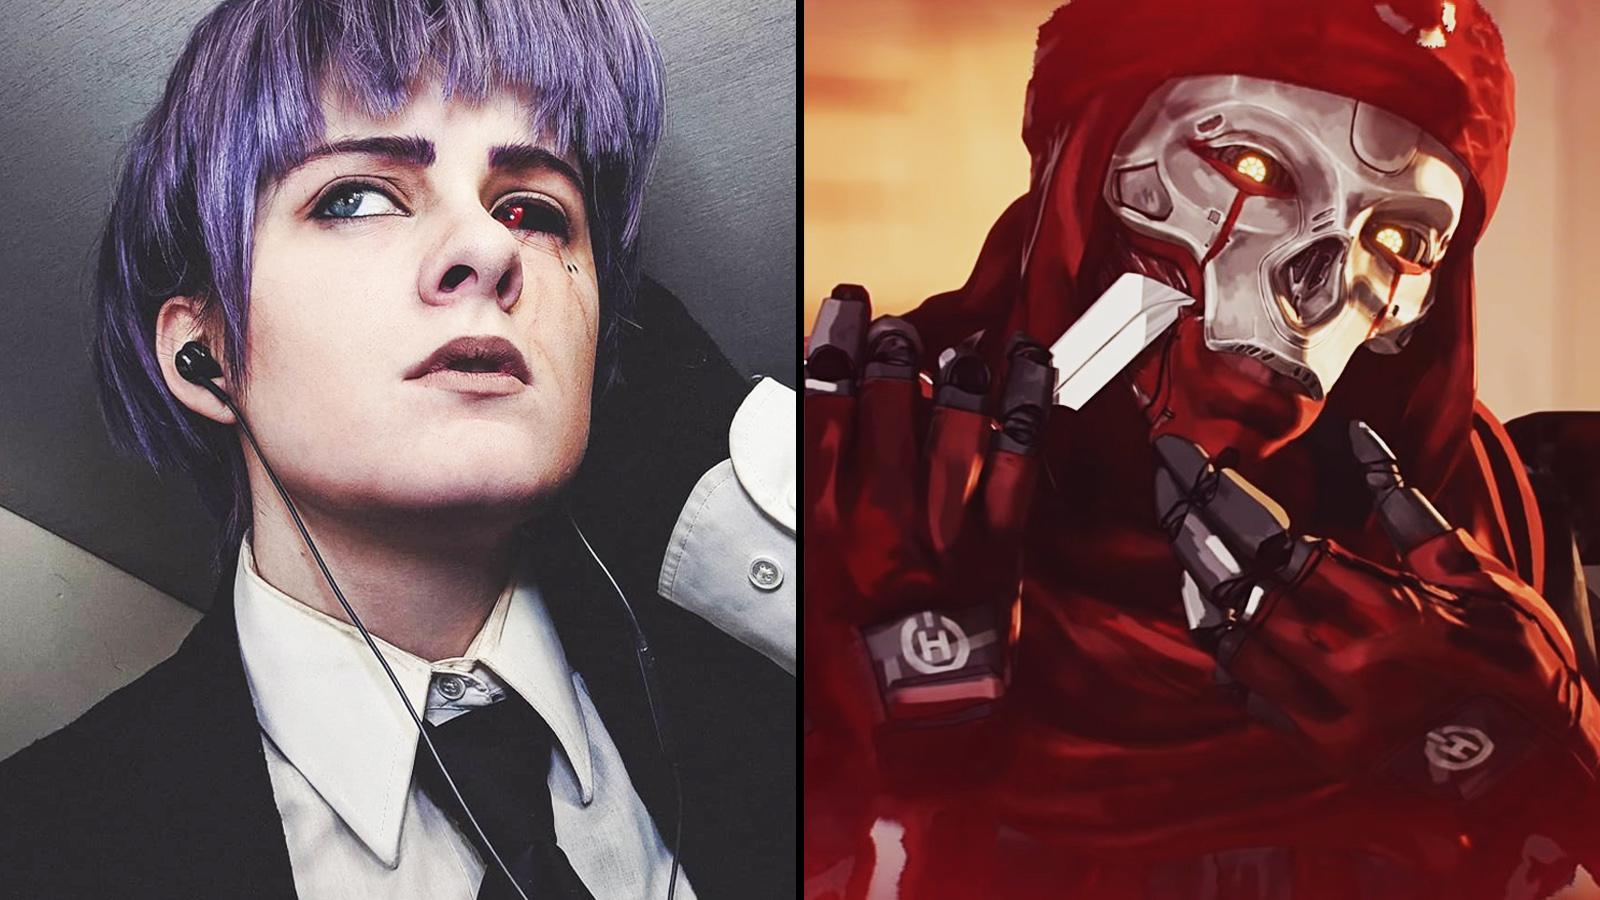 Deathly Revenant cosplay will give Apex Legends fans chills